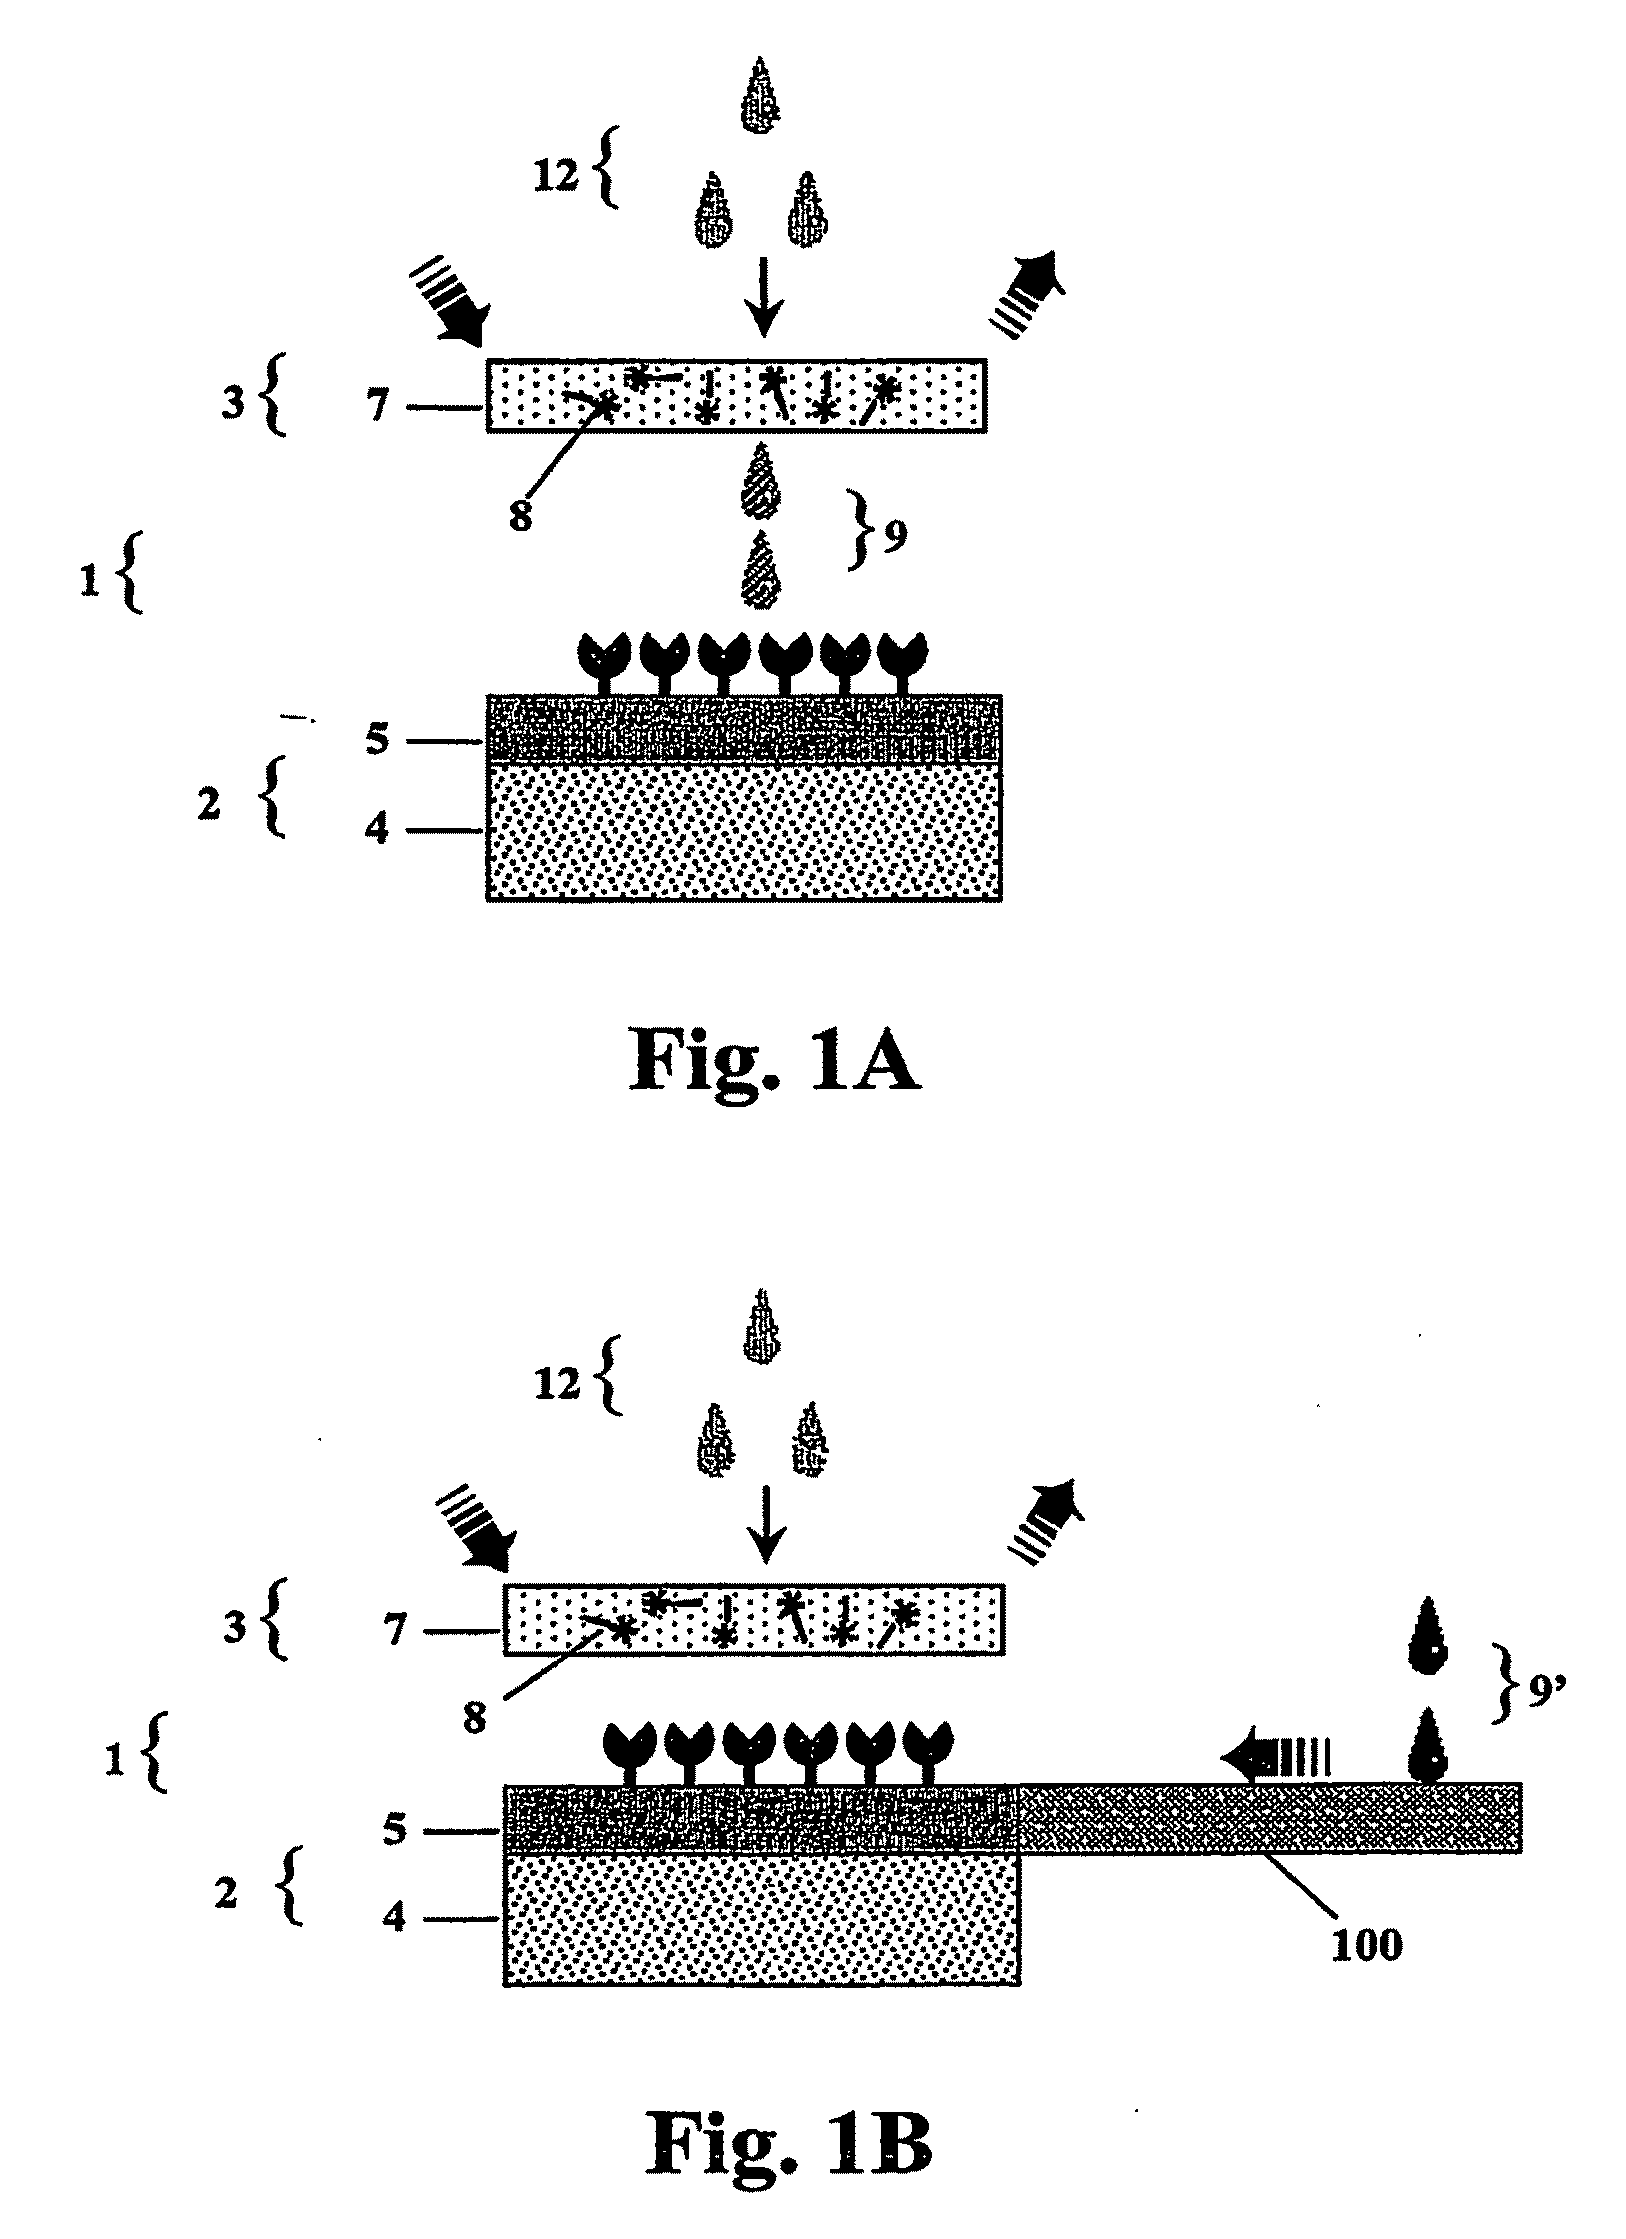 Rapid diagnostic device, assay and multifunctional buffer